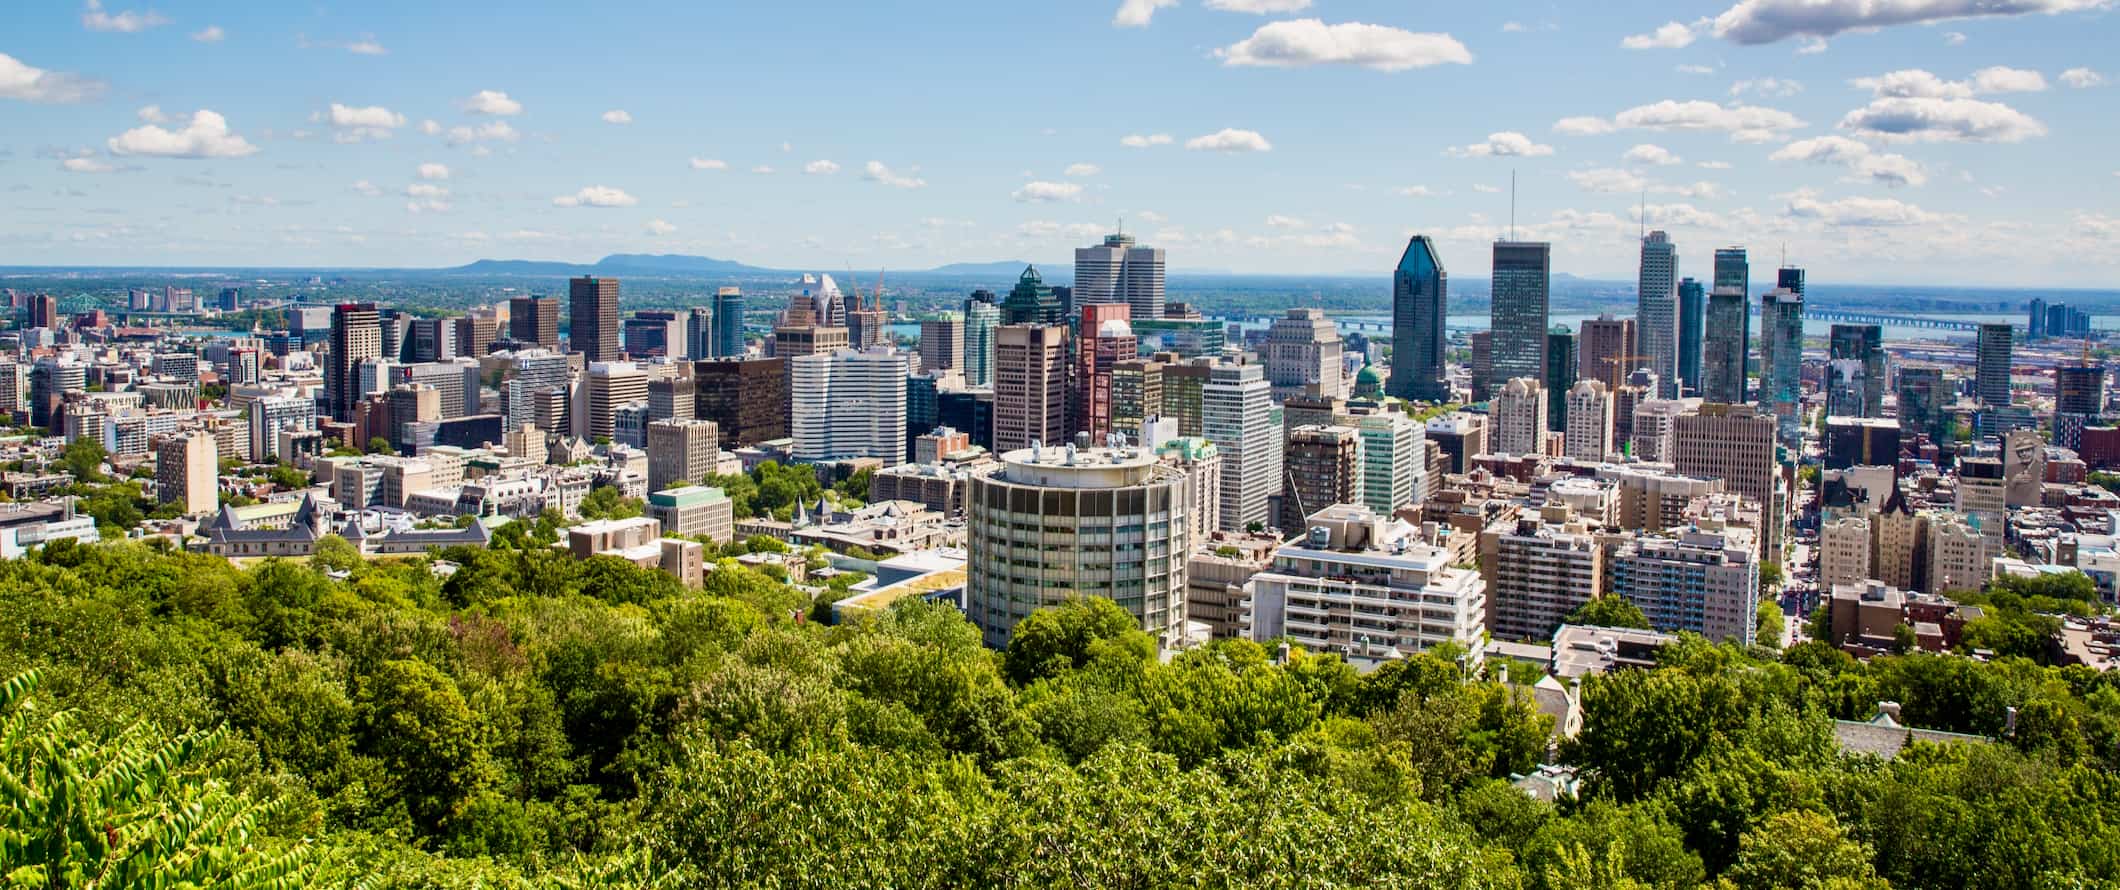 A view of Montreal from Mont Royal during the summer with lush green leaves in the foreground